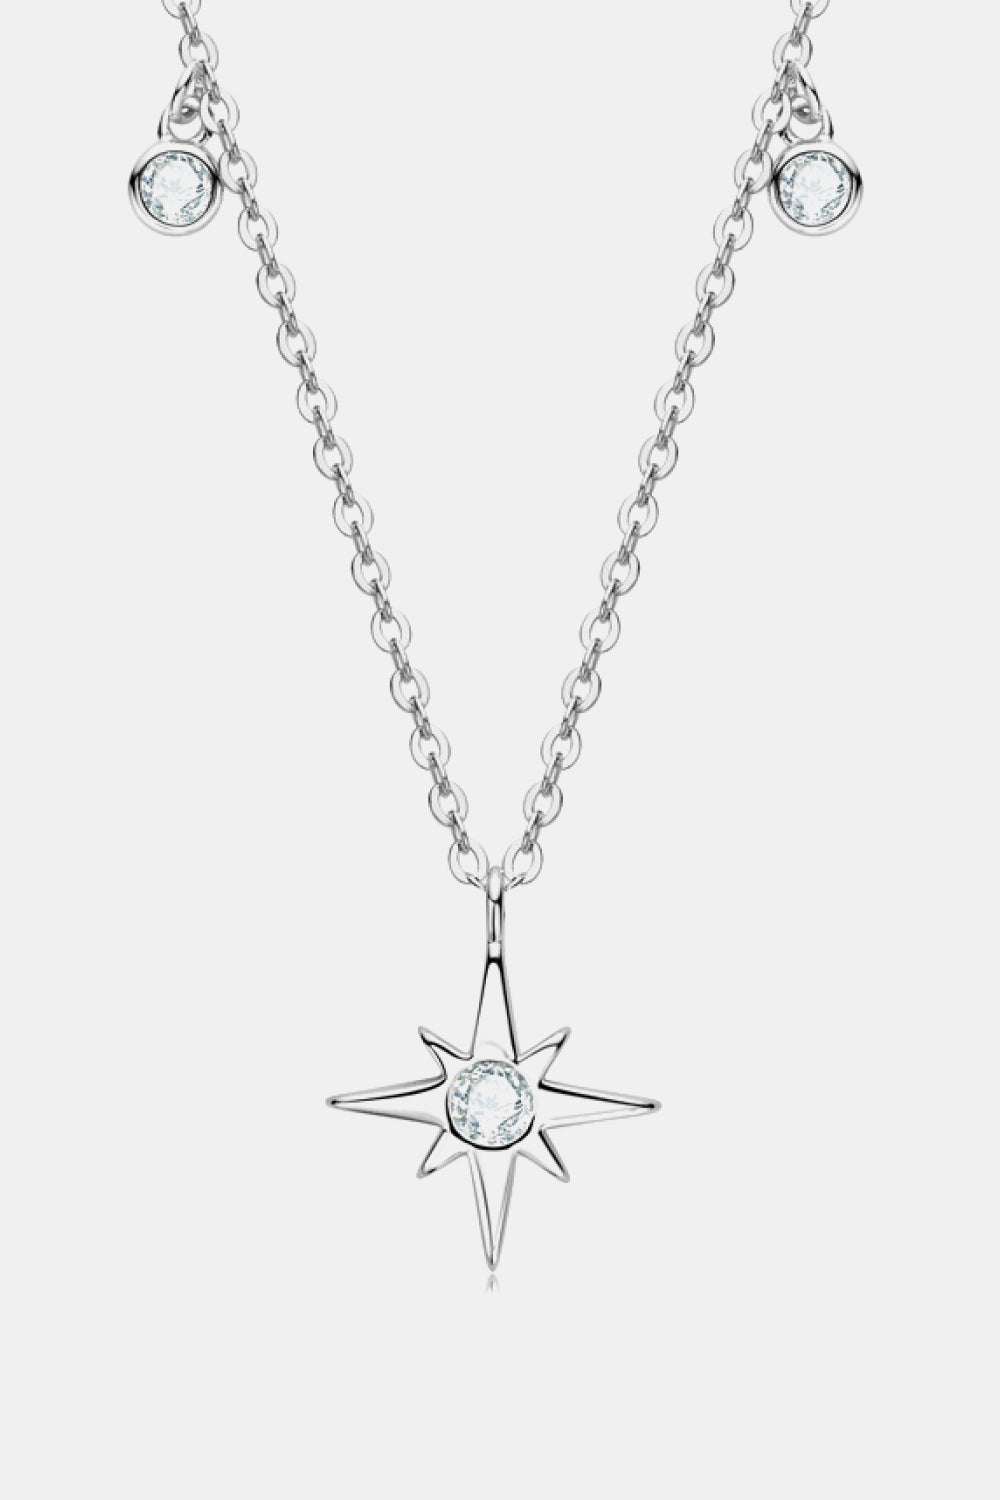 Moissanite North Star Pendant 925 Sterling Silver Necklace BLUE ZONE PLANET